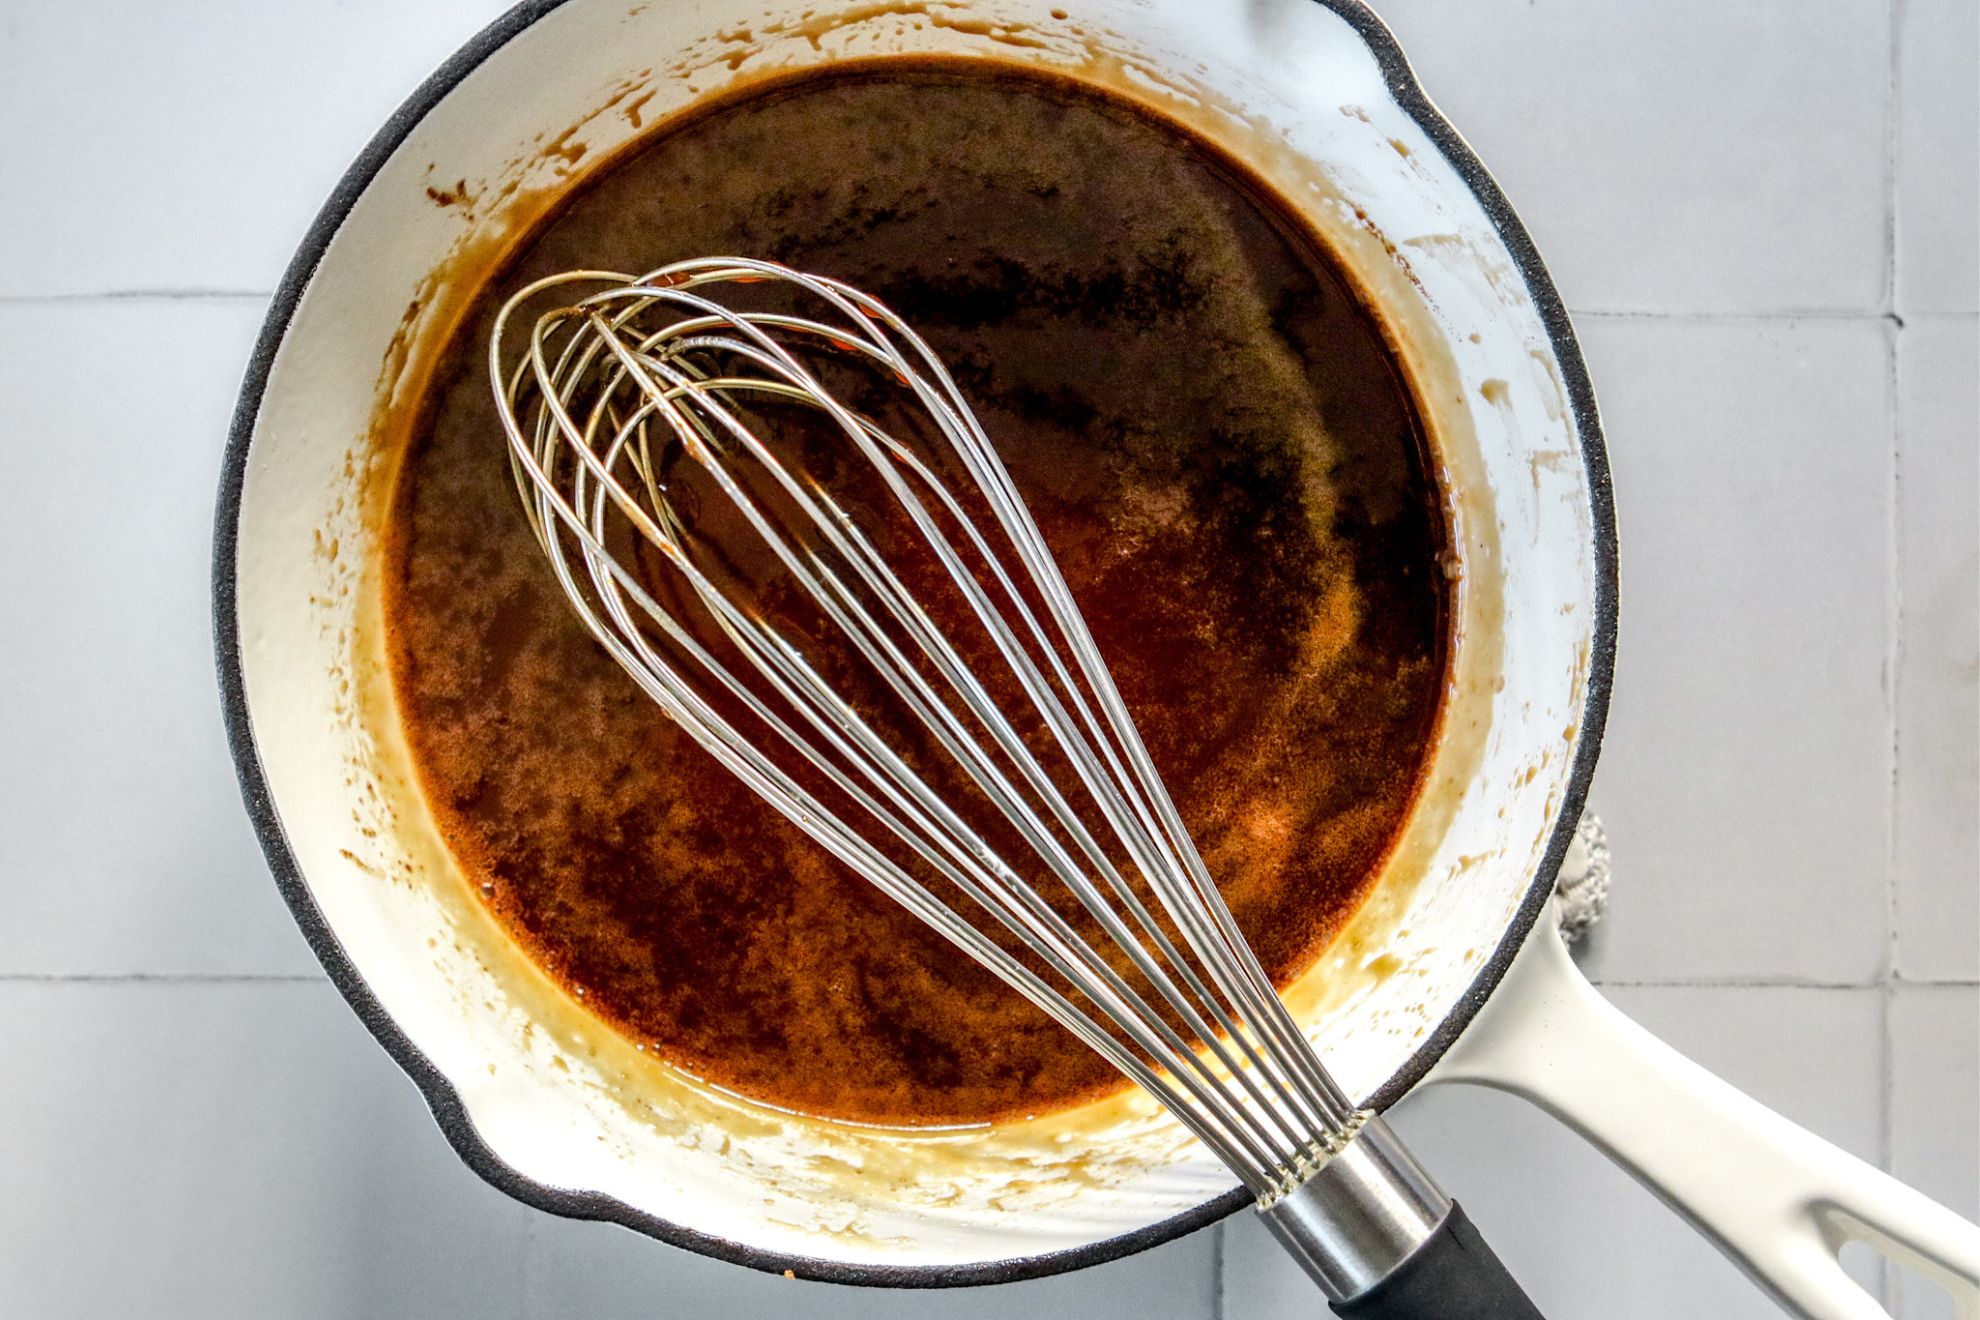 This is an overhead horizontal image of a small white saucepan with a caramel mixture. A silver whisk is in the caramel with the handle leaning against the rim and pointing to the bottom of the image. The pan sits on a white square tile surface.